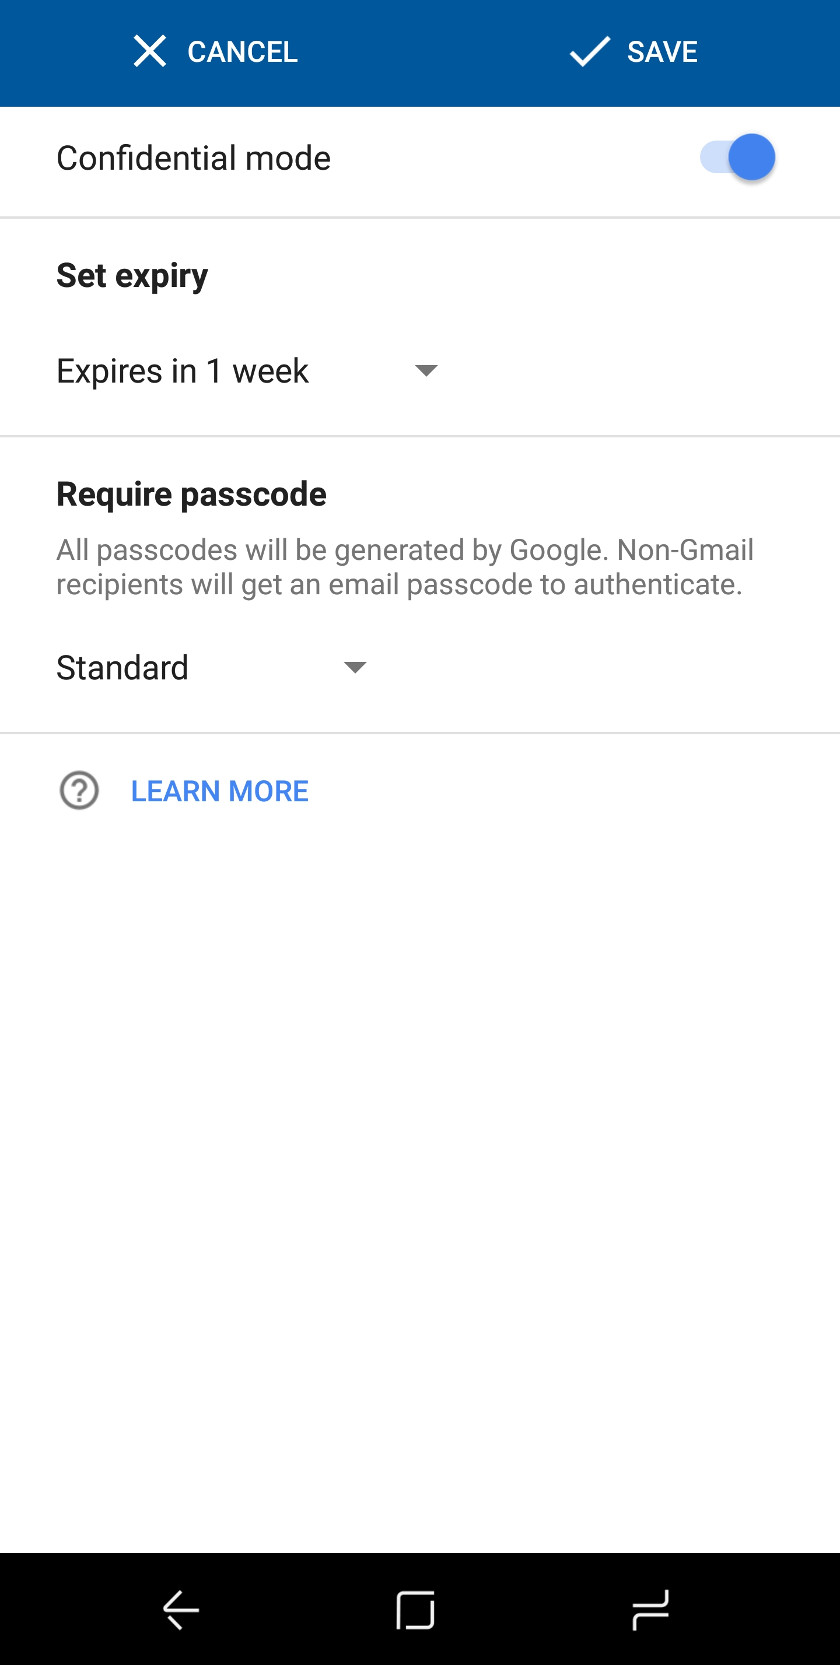 Confidential mode in Gmail.